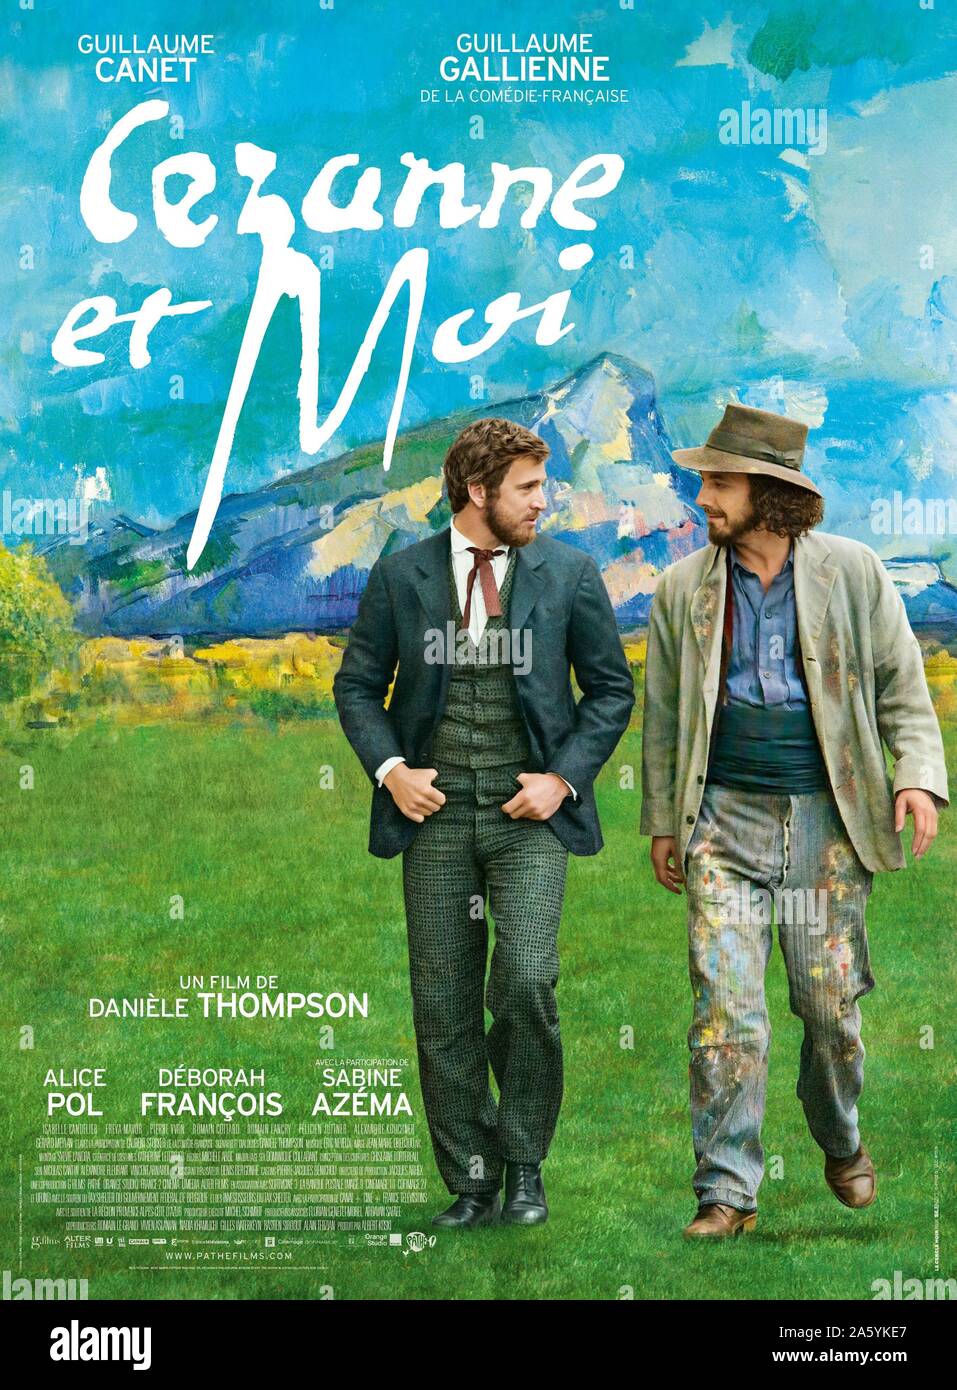 Cezanne et moi Year : 2016 France Director : Daniele Thompson Guillaume Canet, Guillaume Gallienne  Poster (Fr) Stock Photo